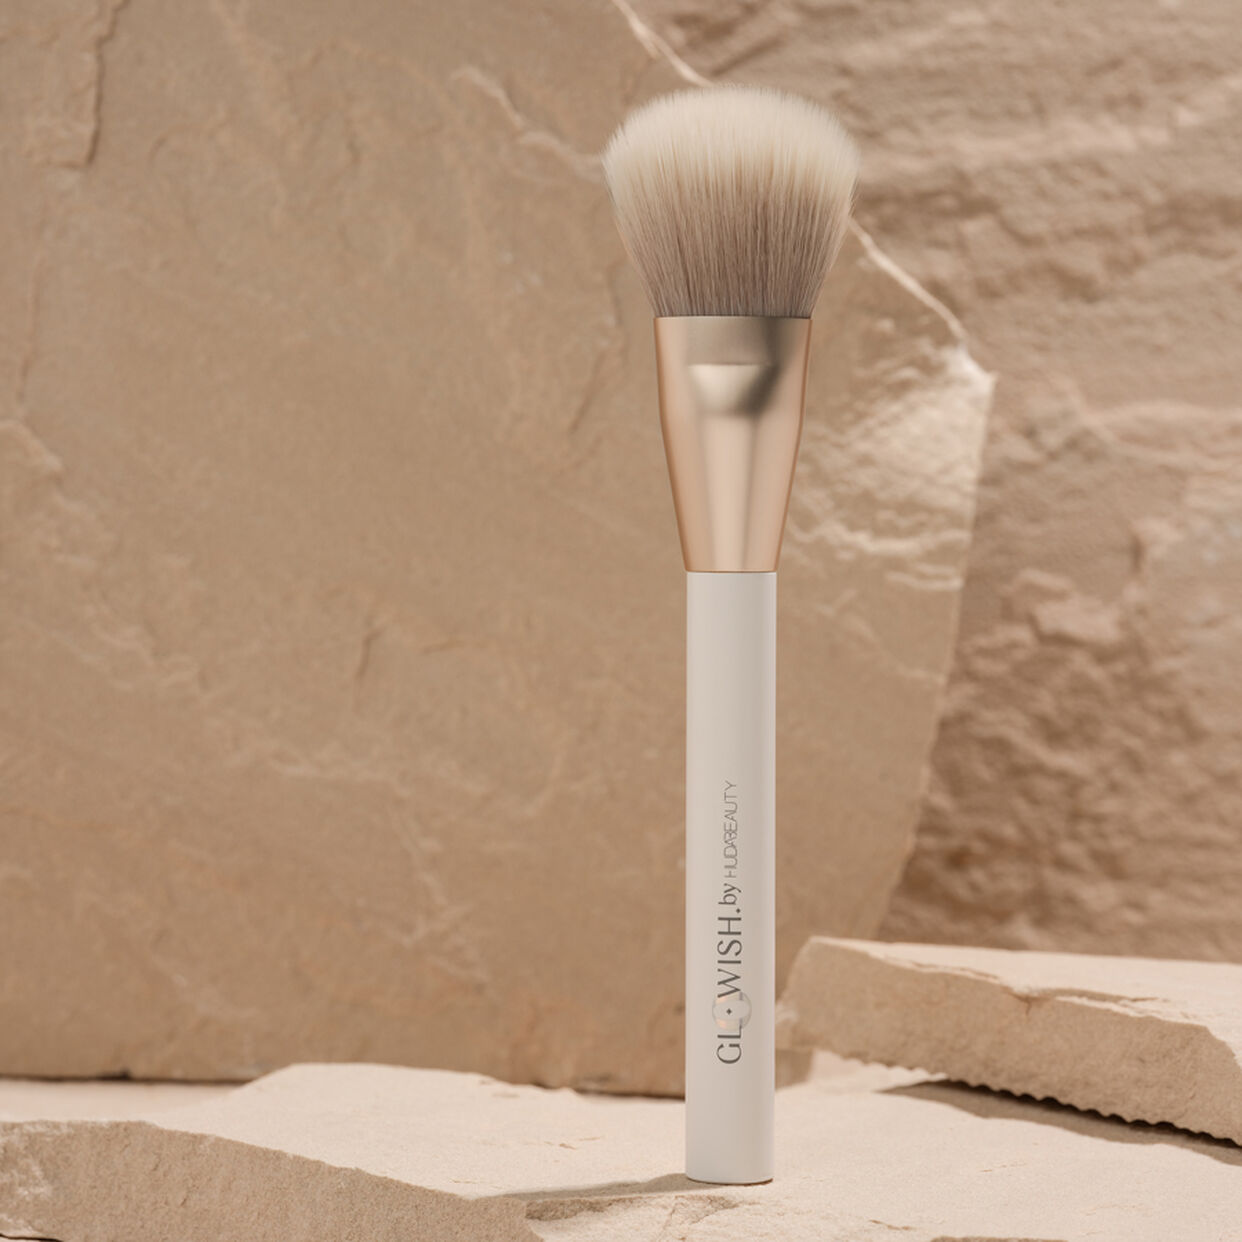 Essence make up buffer brush - White - 1722 requests